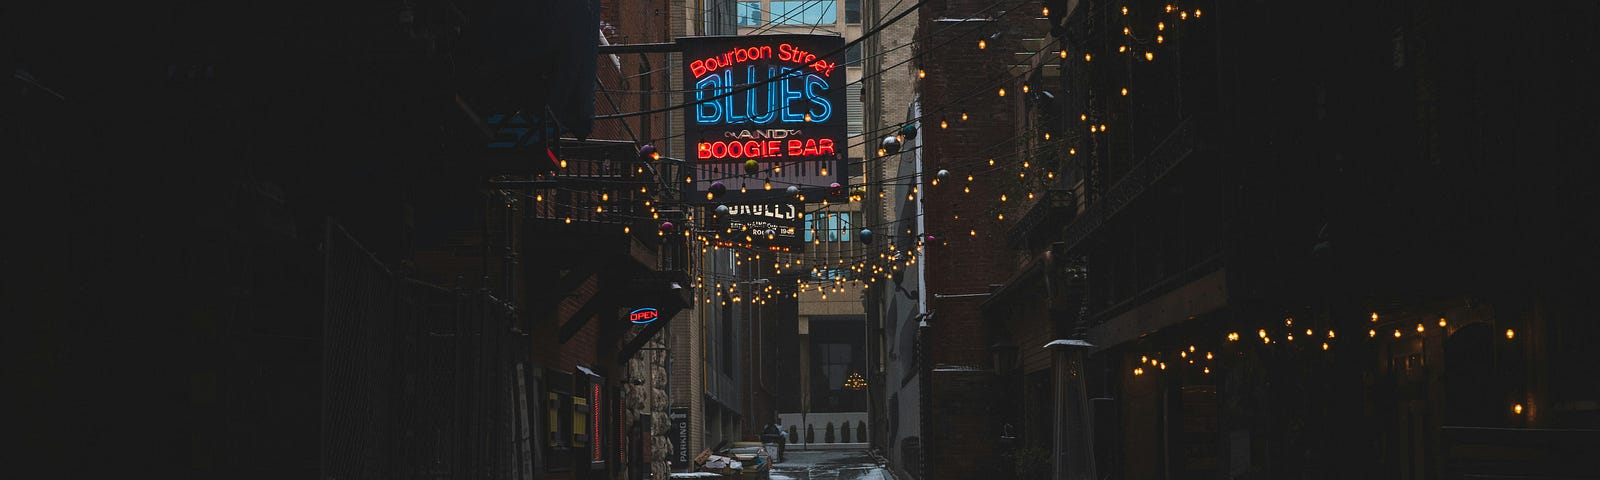 A strip of bars, with neon and string lights, in an alley on an early winter morning.